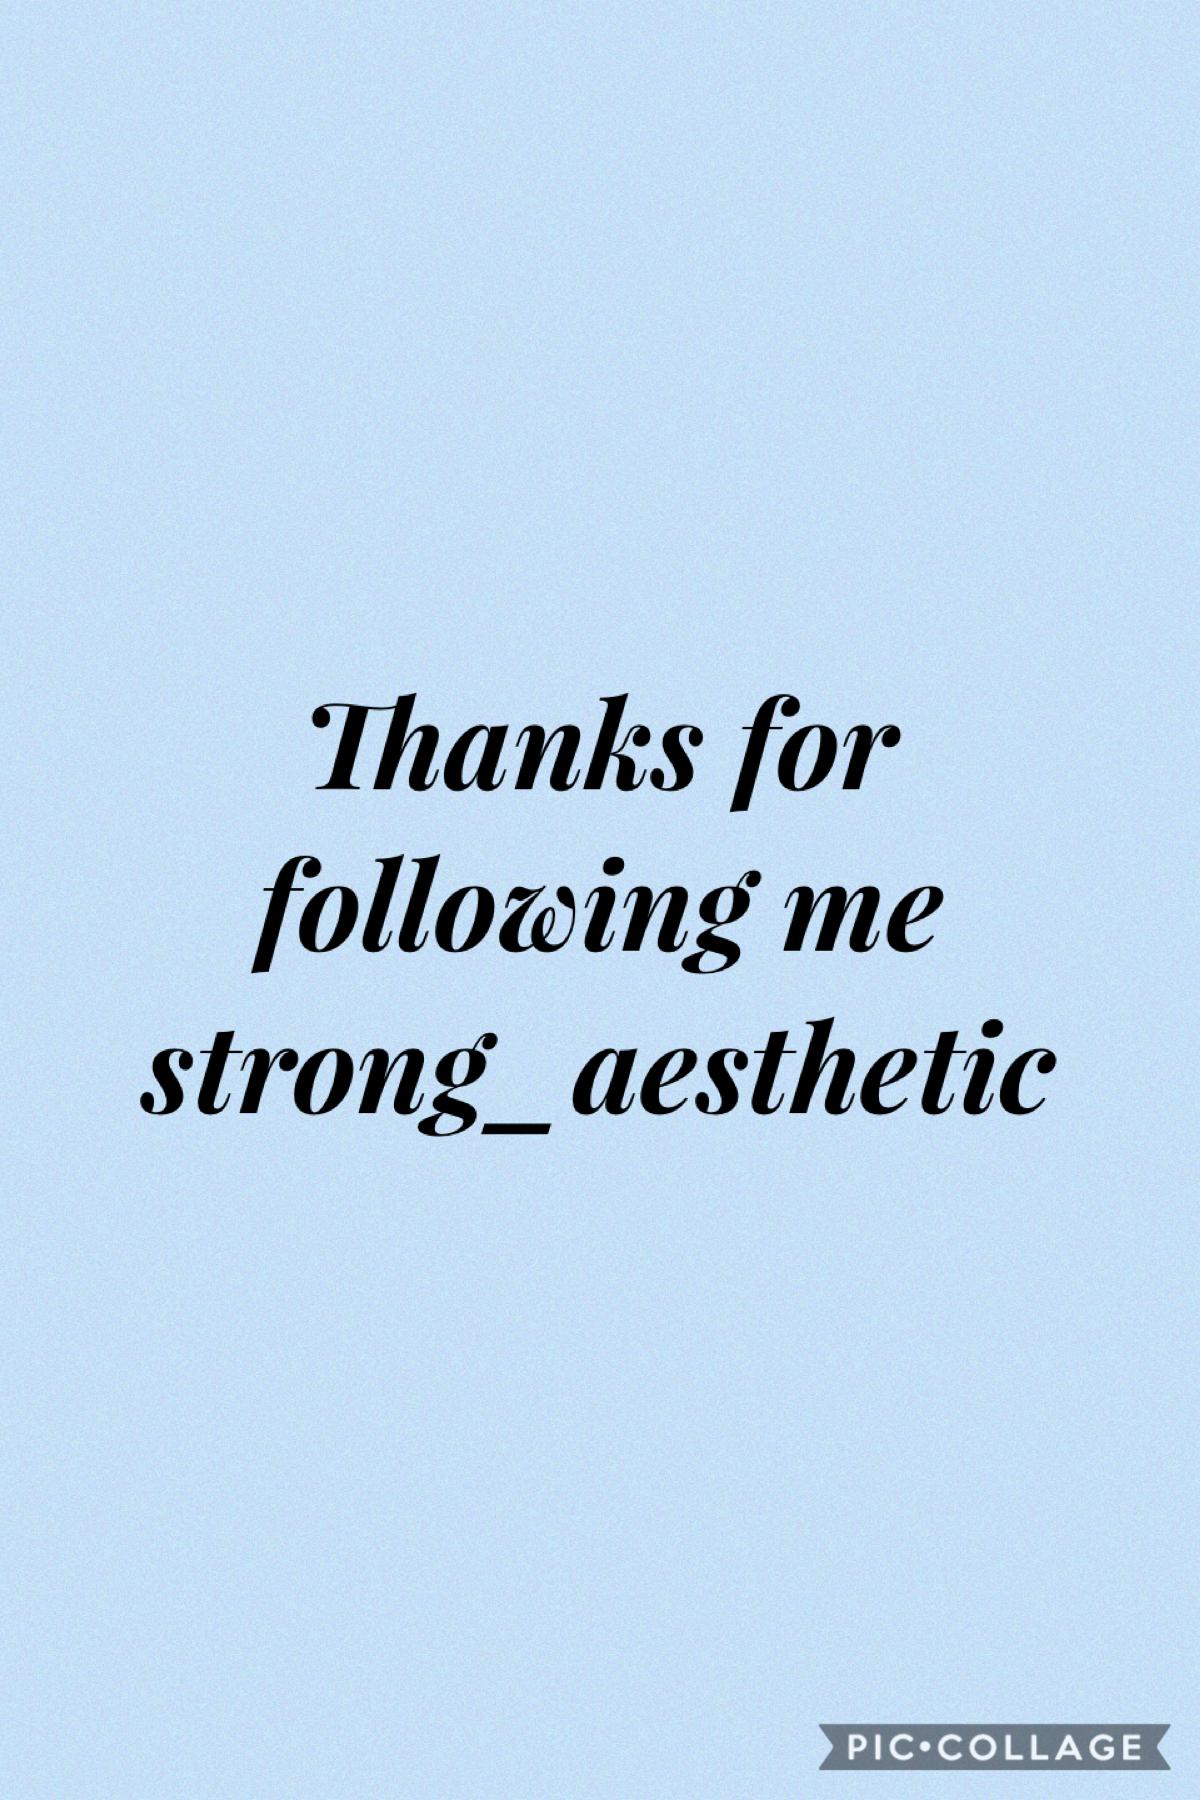 Thx for following me 